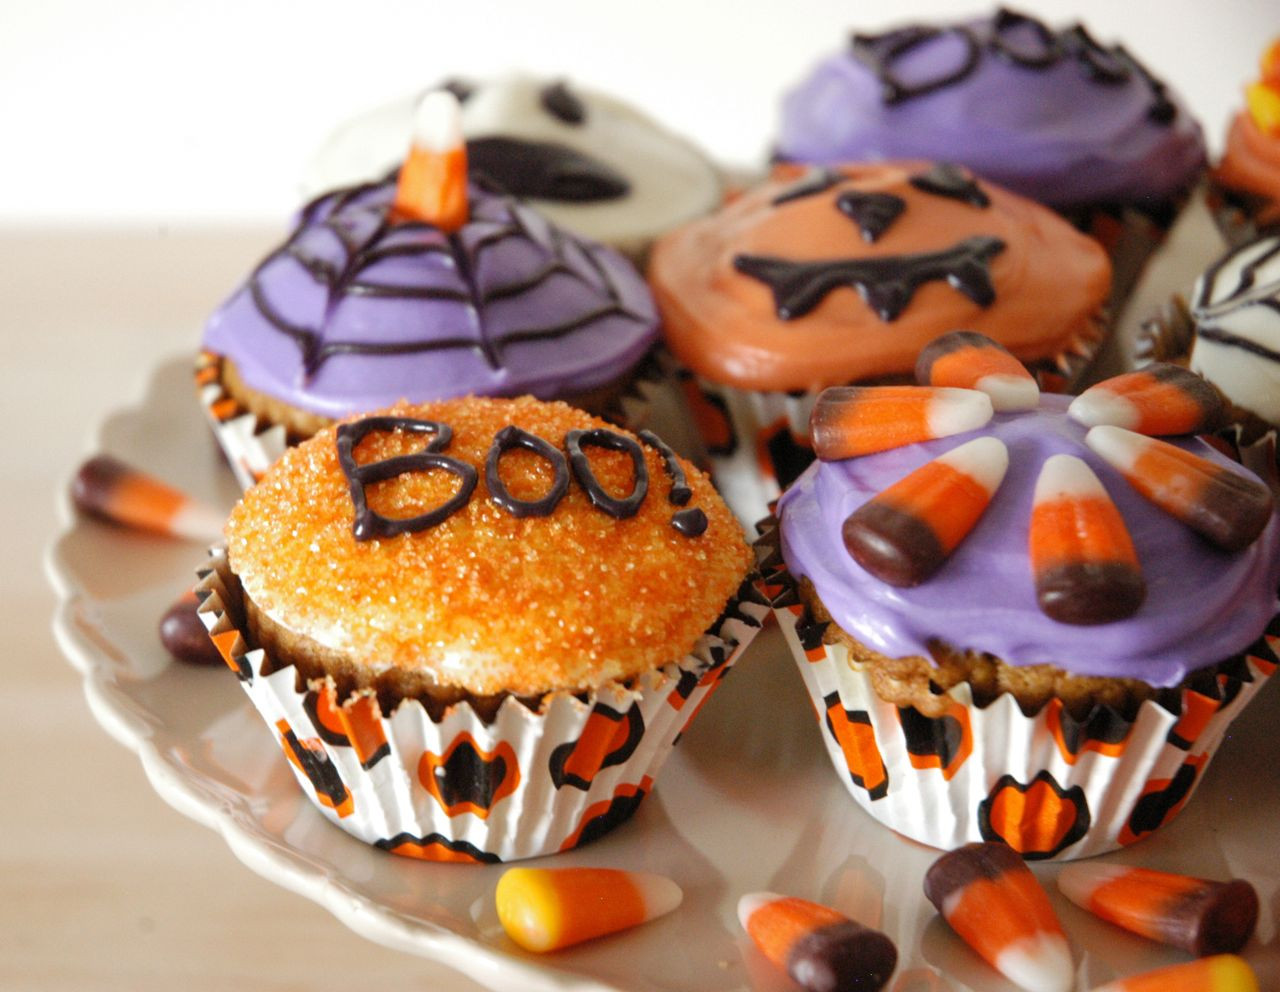 Halloween Cupcakes Images
 Goddess of Baking Spiced Pumpkin Cupcakes for Halloween